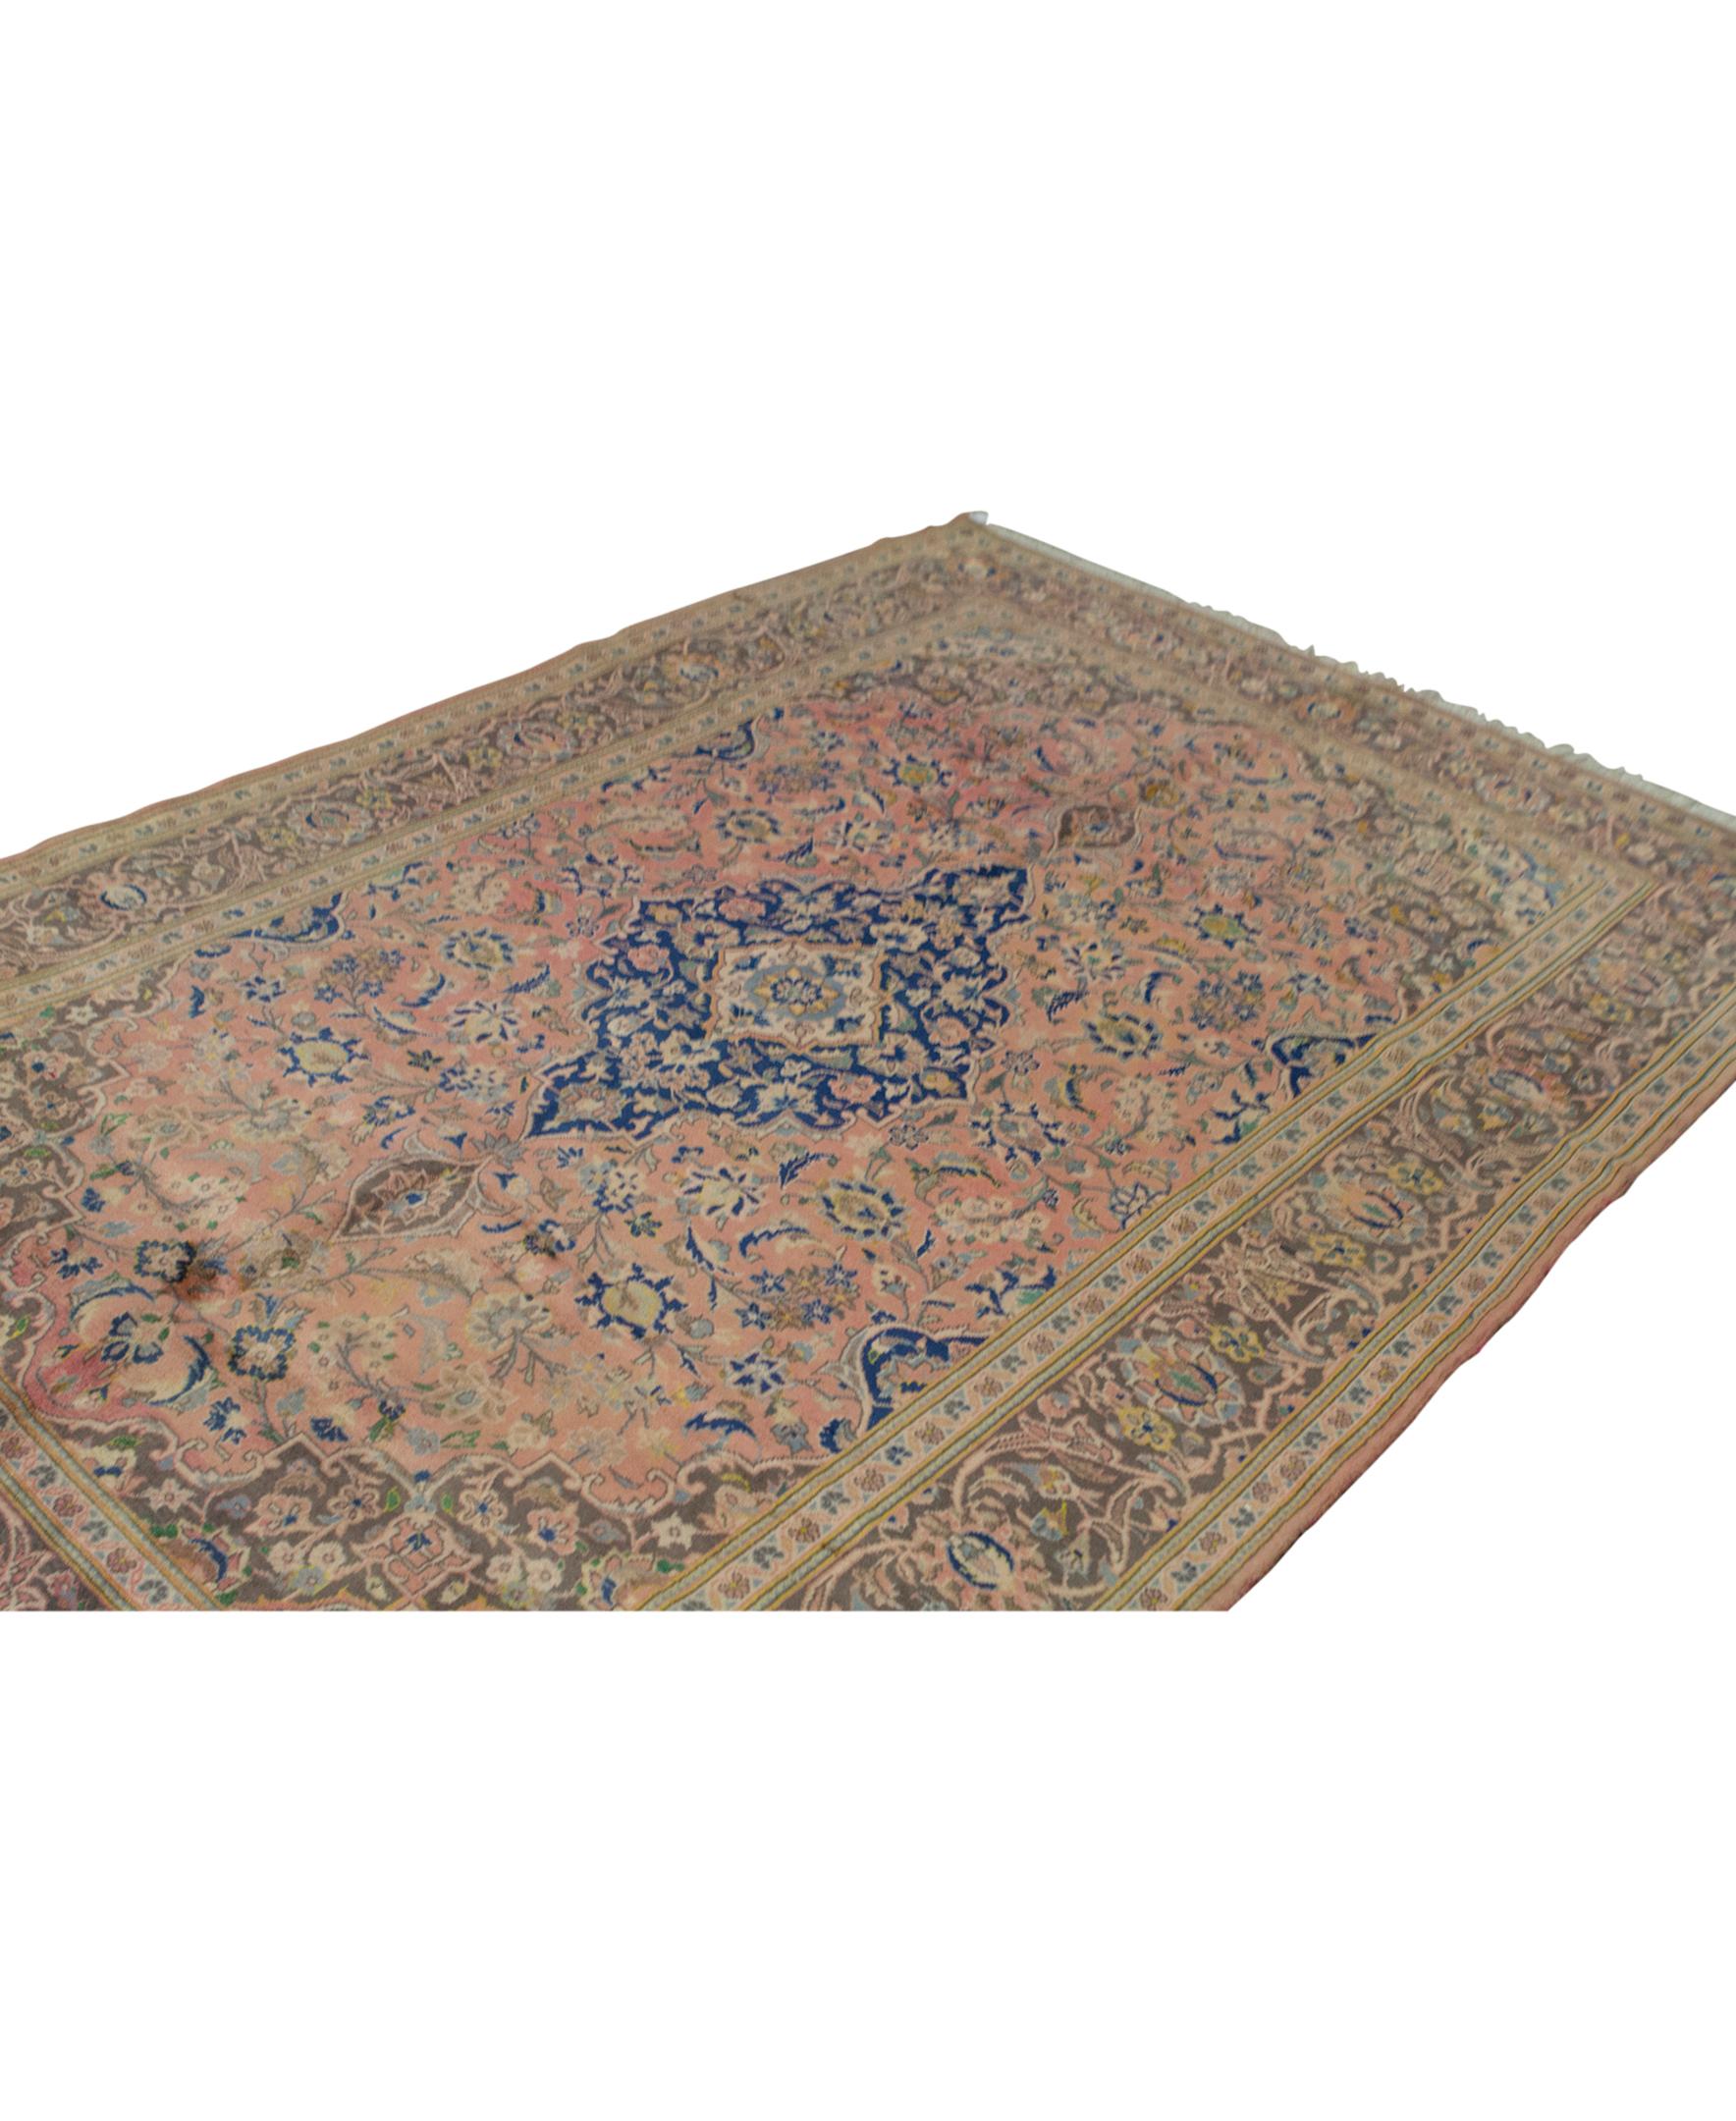  Antique Persian fine Traditional Handwoven Luxury Wool Rug.Size: 6'-7